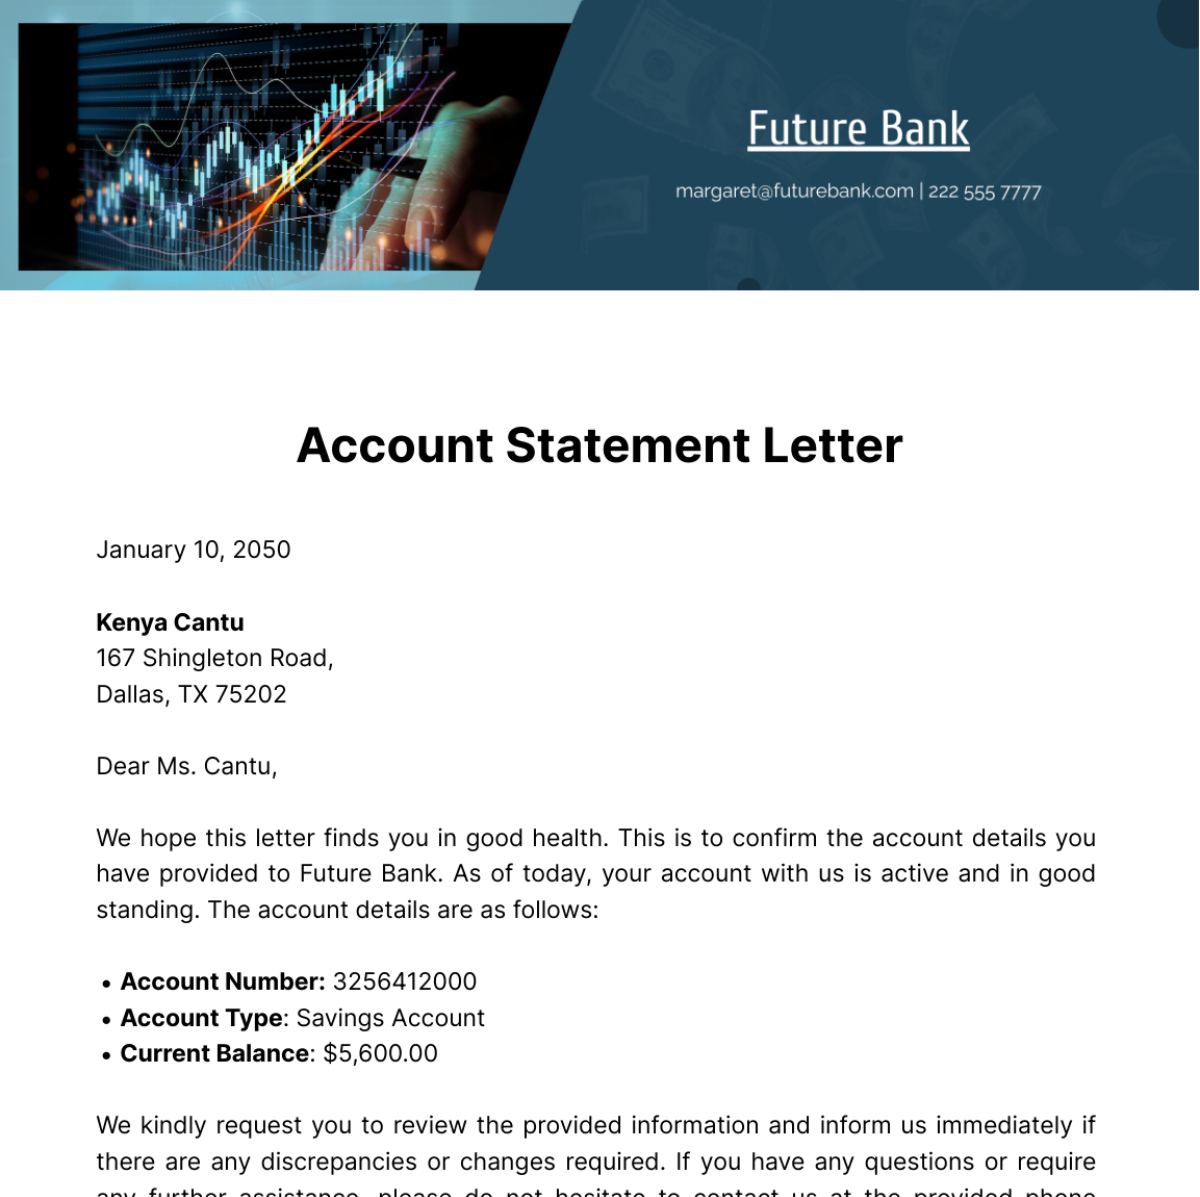 Account Statement Letter Template